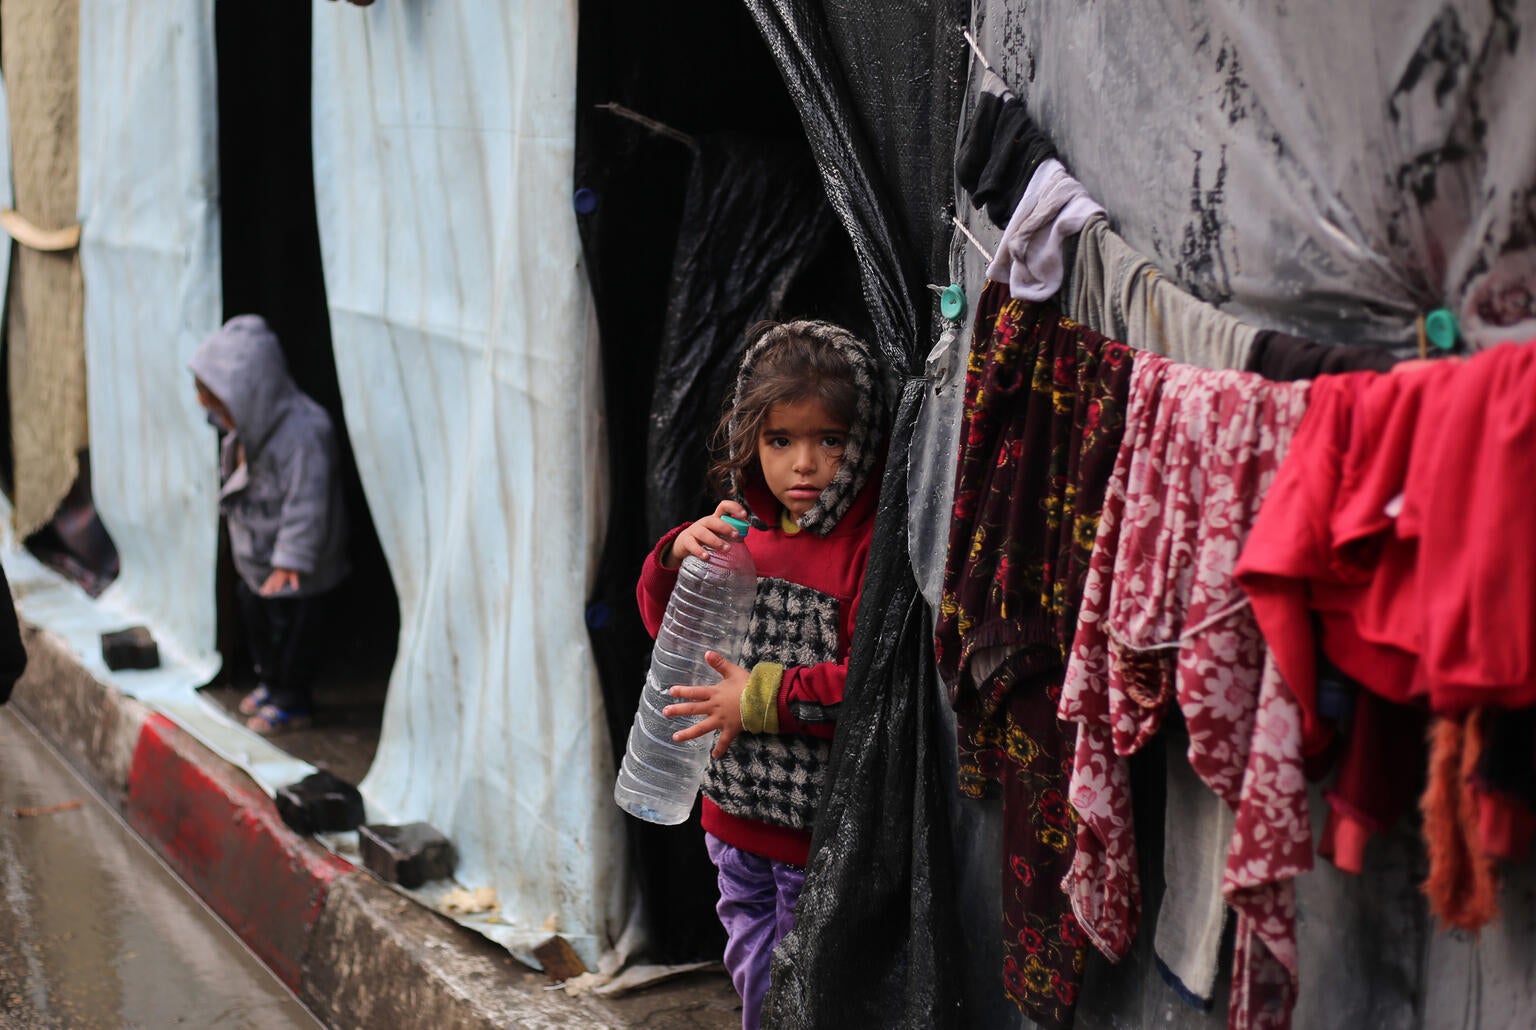 Girl standing outside temporary shelter in the Gaza Strip conflict.